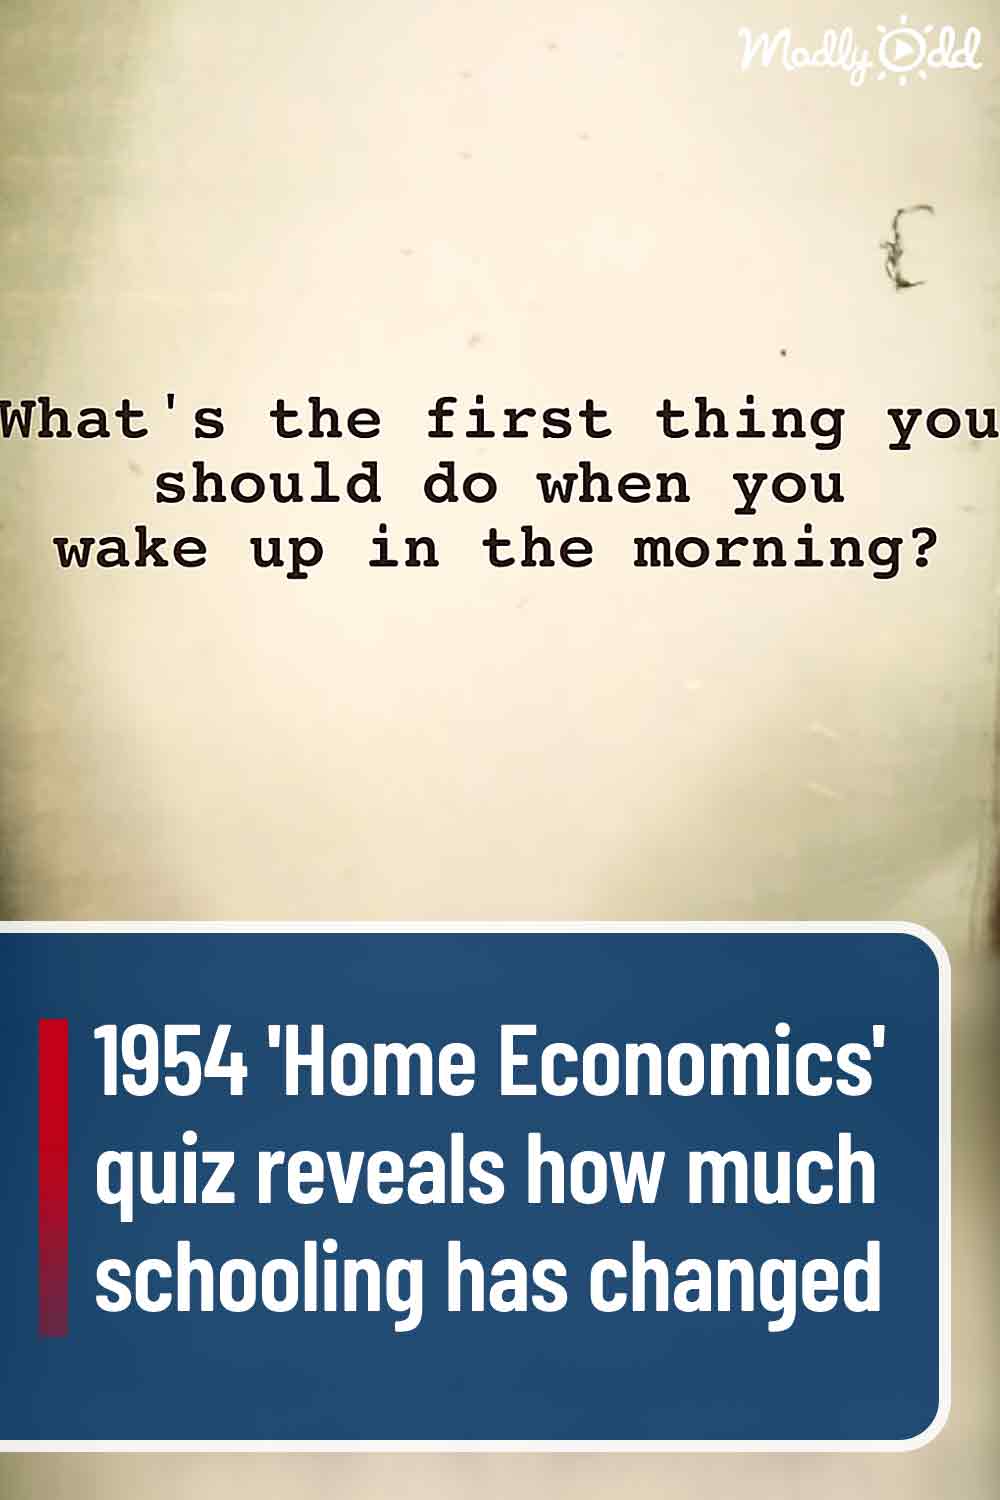 1954 \'Home Economics\' quiz reveals how much schooling has changed